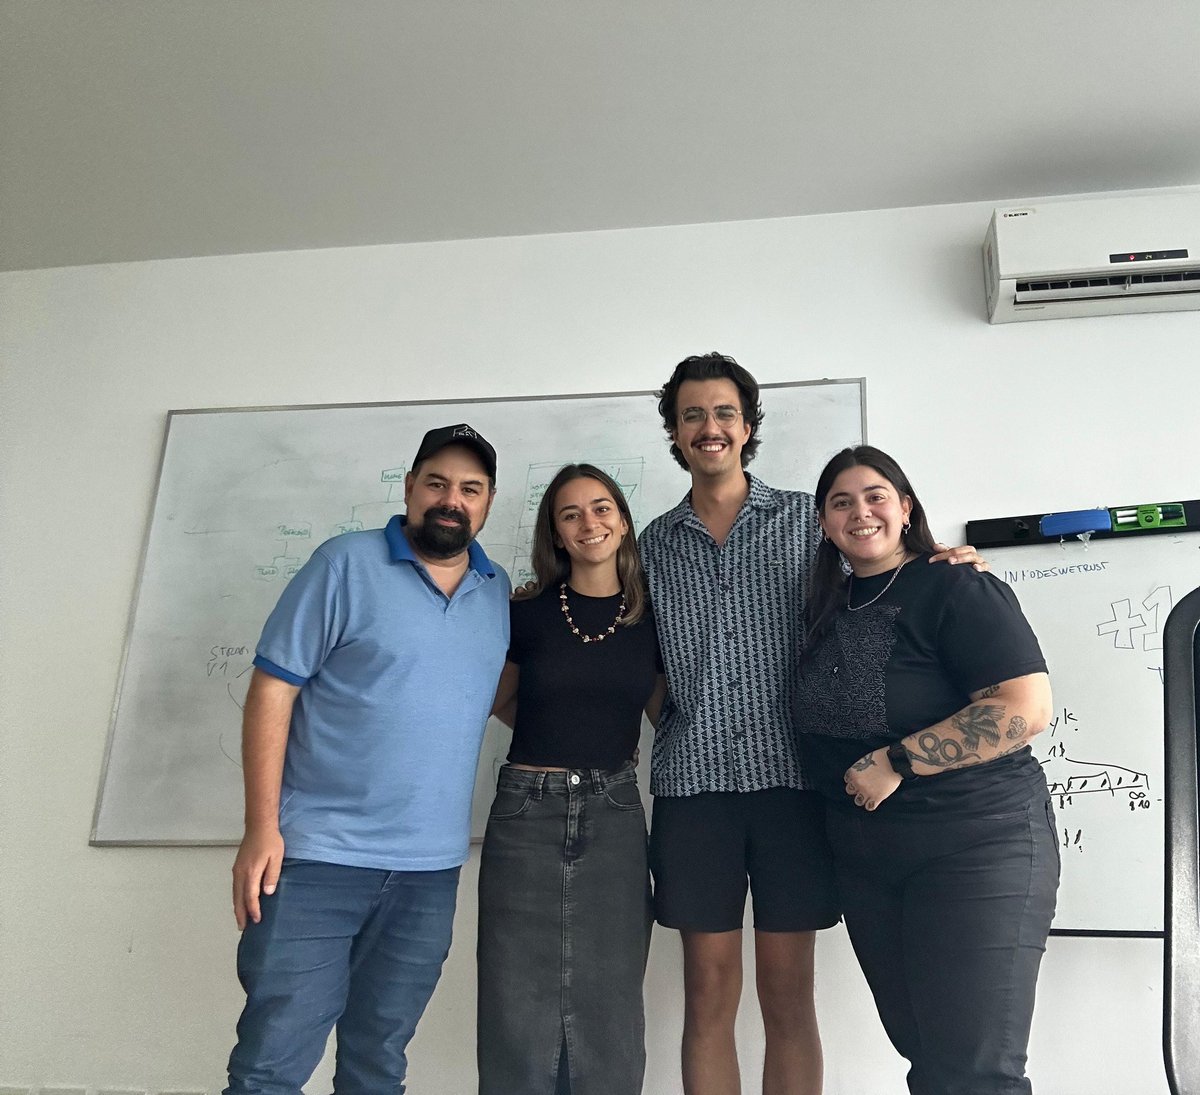 Last Friday, we had a wonderful visit in our office! We welcomed @valeyo777, CEO & Co-founder of @QuasarFi 🪐 It was great to nerd out with you about DeFi and liquidity management ✨️